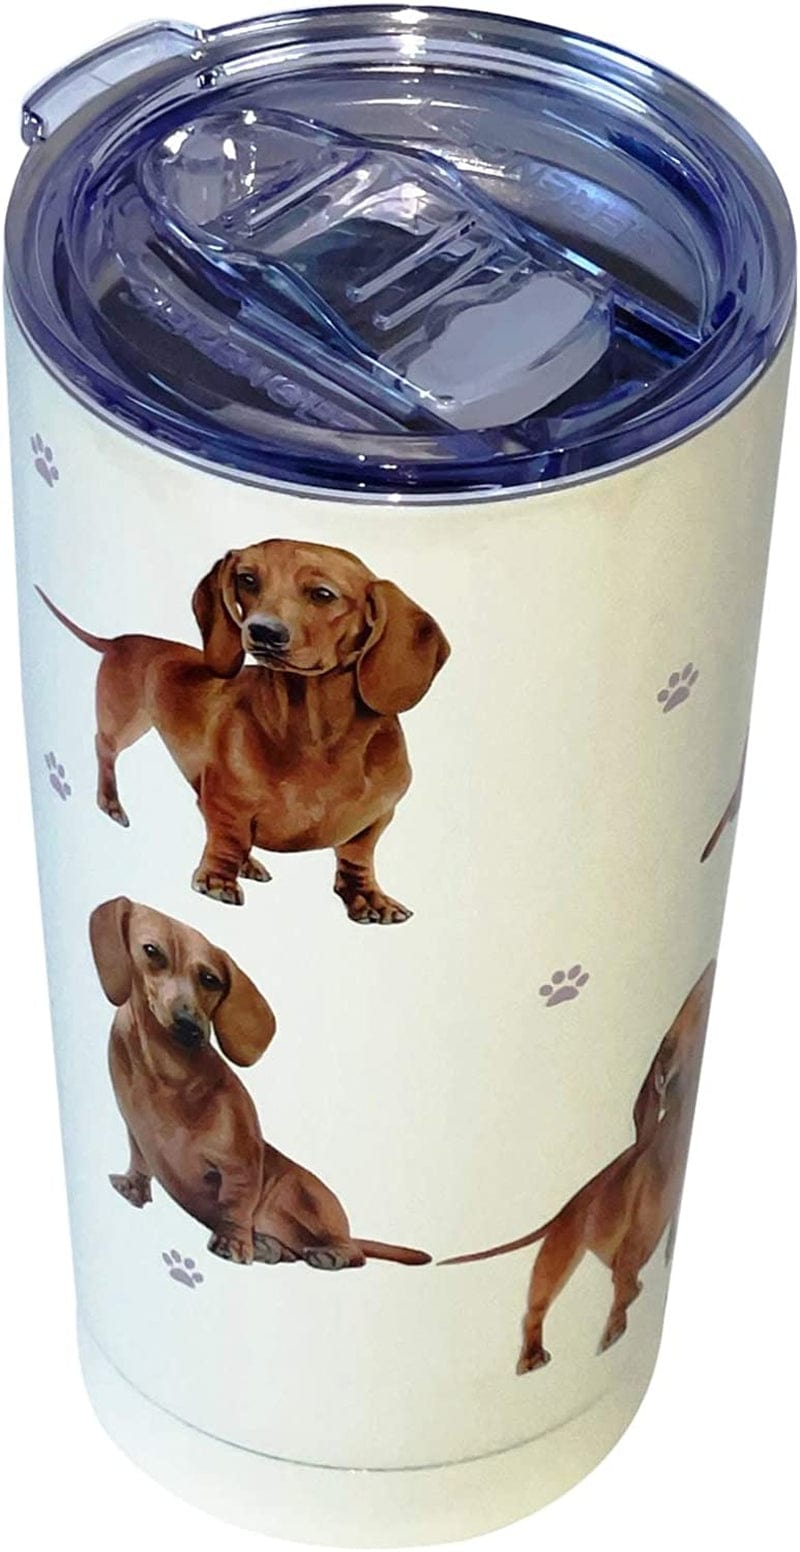 Australian Shepherd SERENGETI 16 Oz. Stainless Steel, Vacuum Insulated Tumbler with Spill Proof Lid - 3D Print - Insulated Travel Mug for Hot or Cold Drinks (Australian Shepherd Tumbler) Home & Garden > Kitchen & Dining > Tableware > Drinkware SERENGETI Dachshund Red Tumbler  